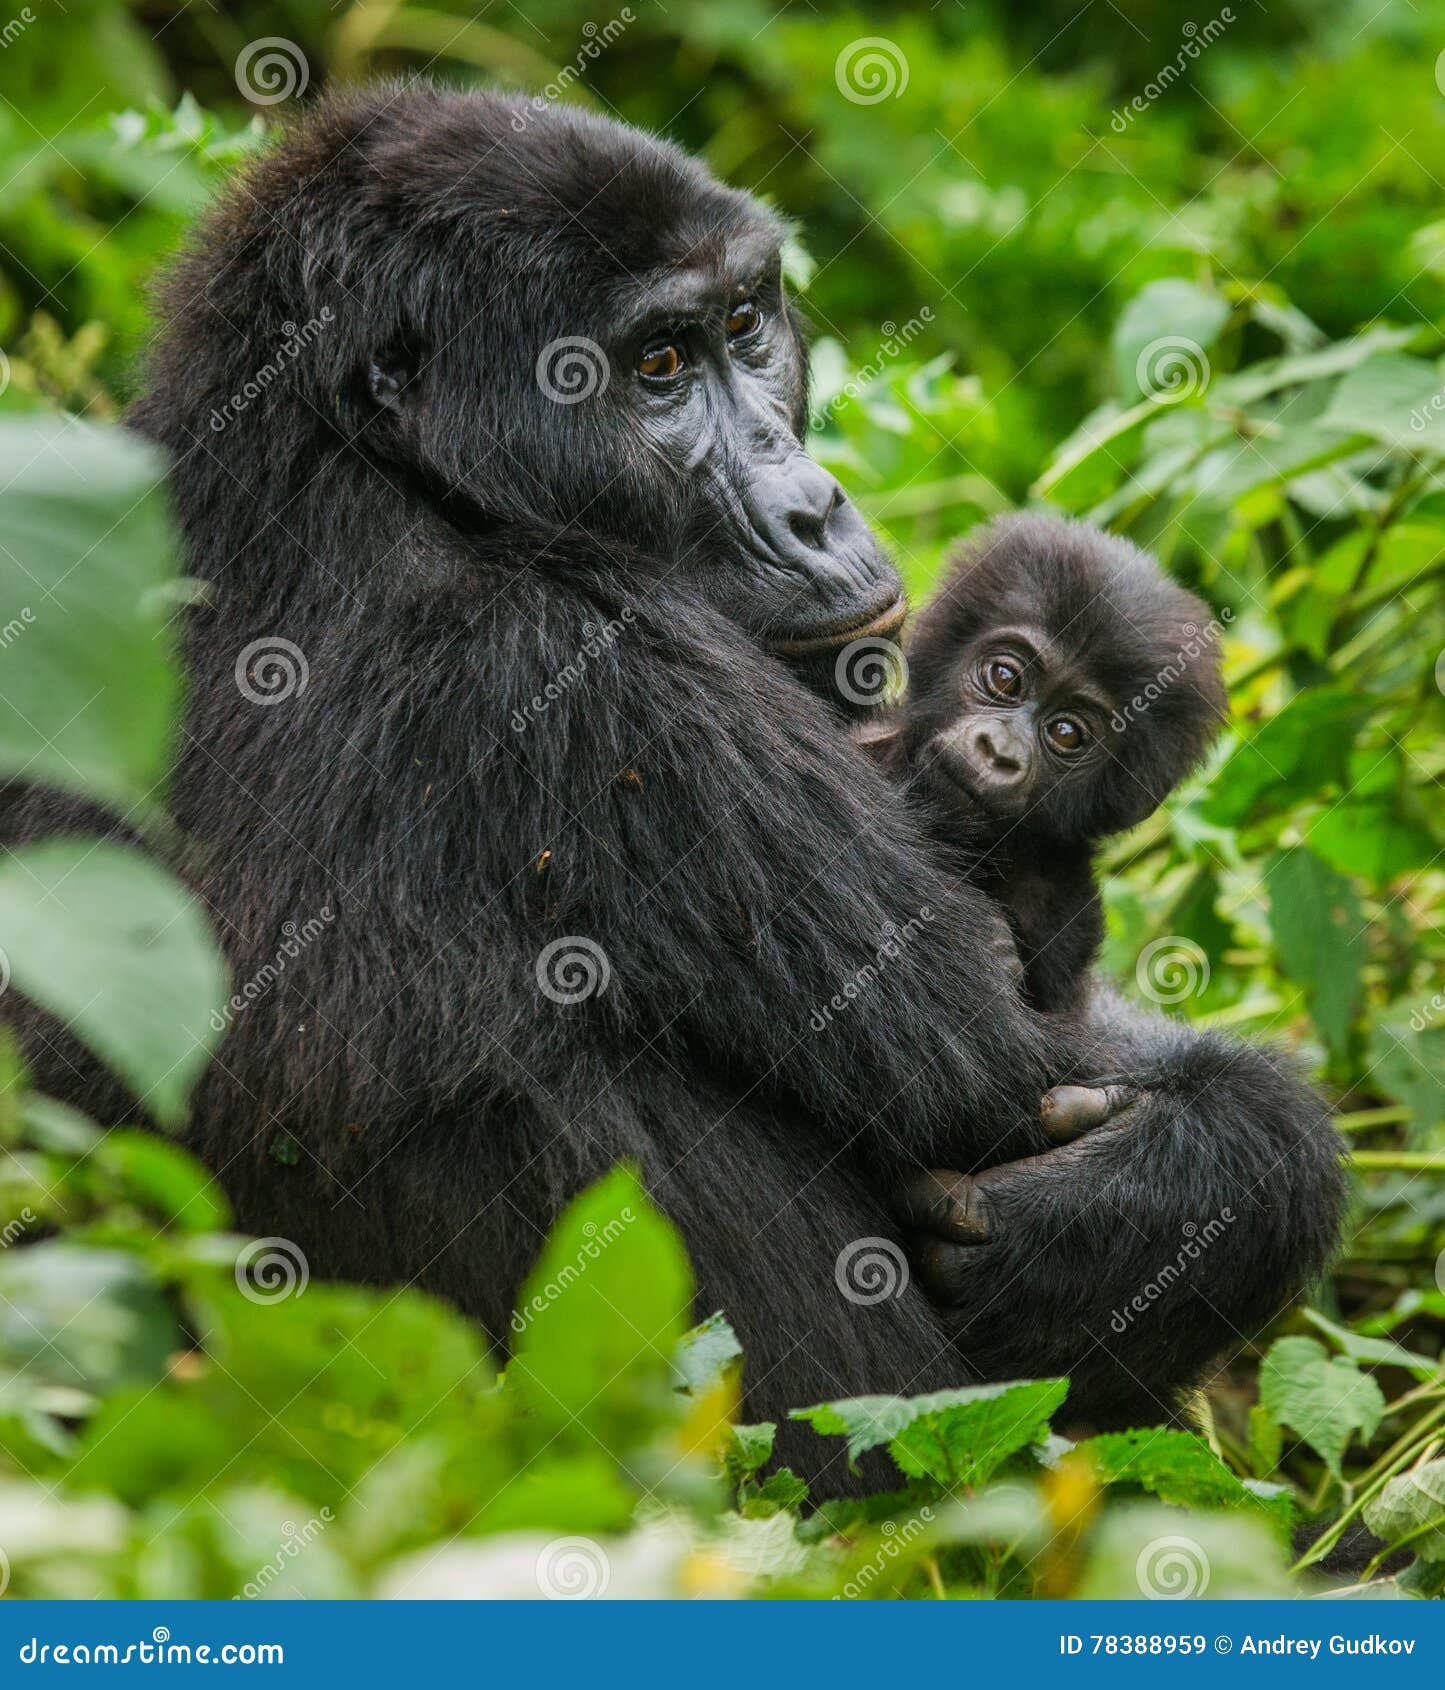 a female mountain gorilla with a baby. uganda. bwindi impenetrable forest national park.